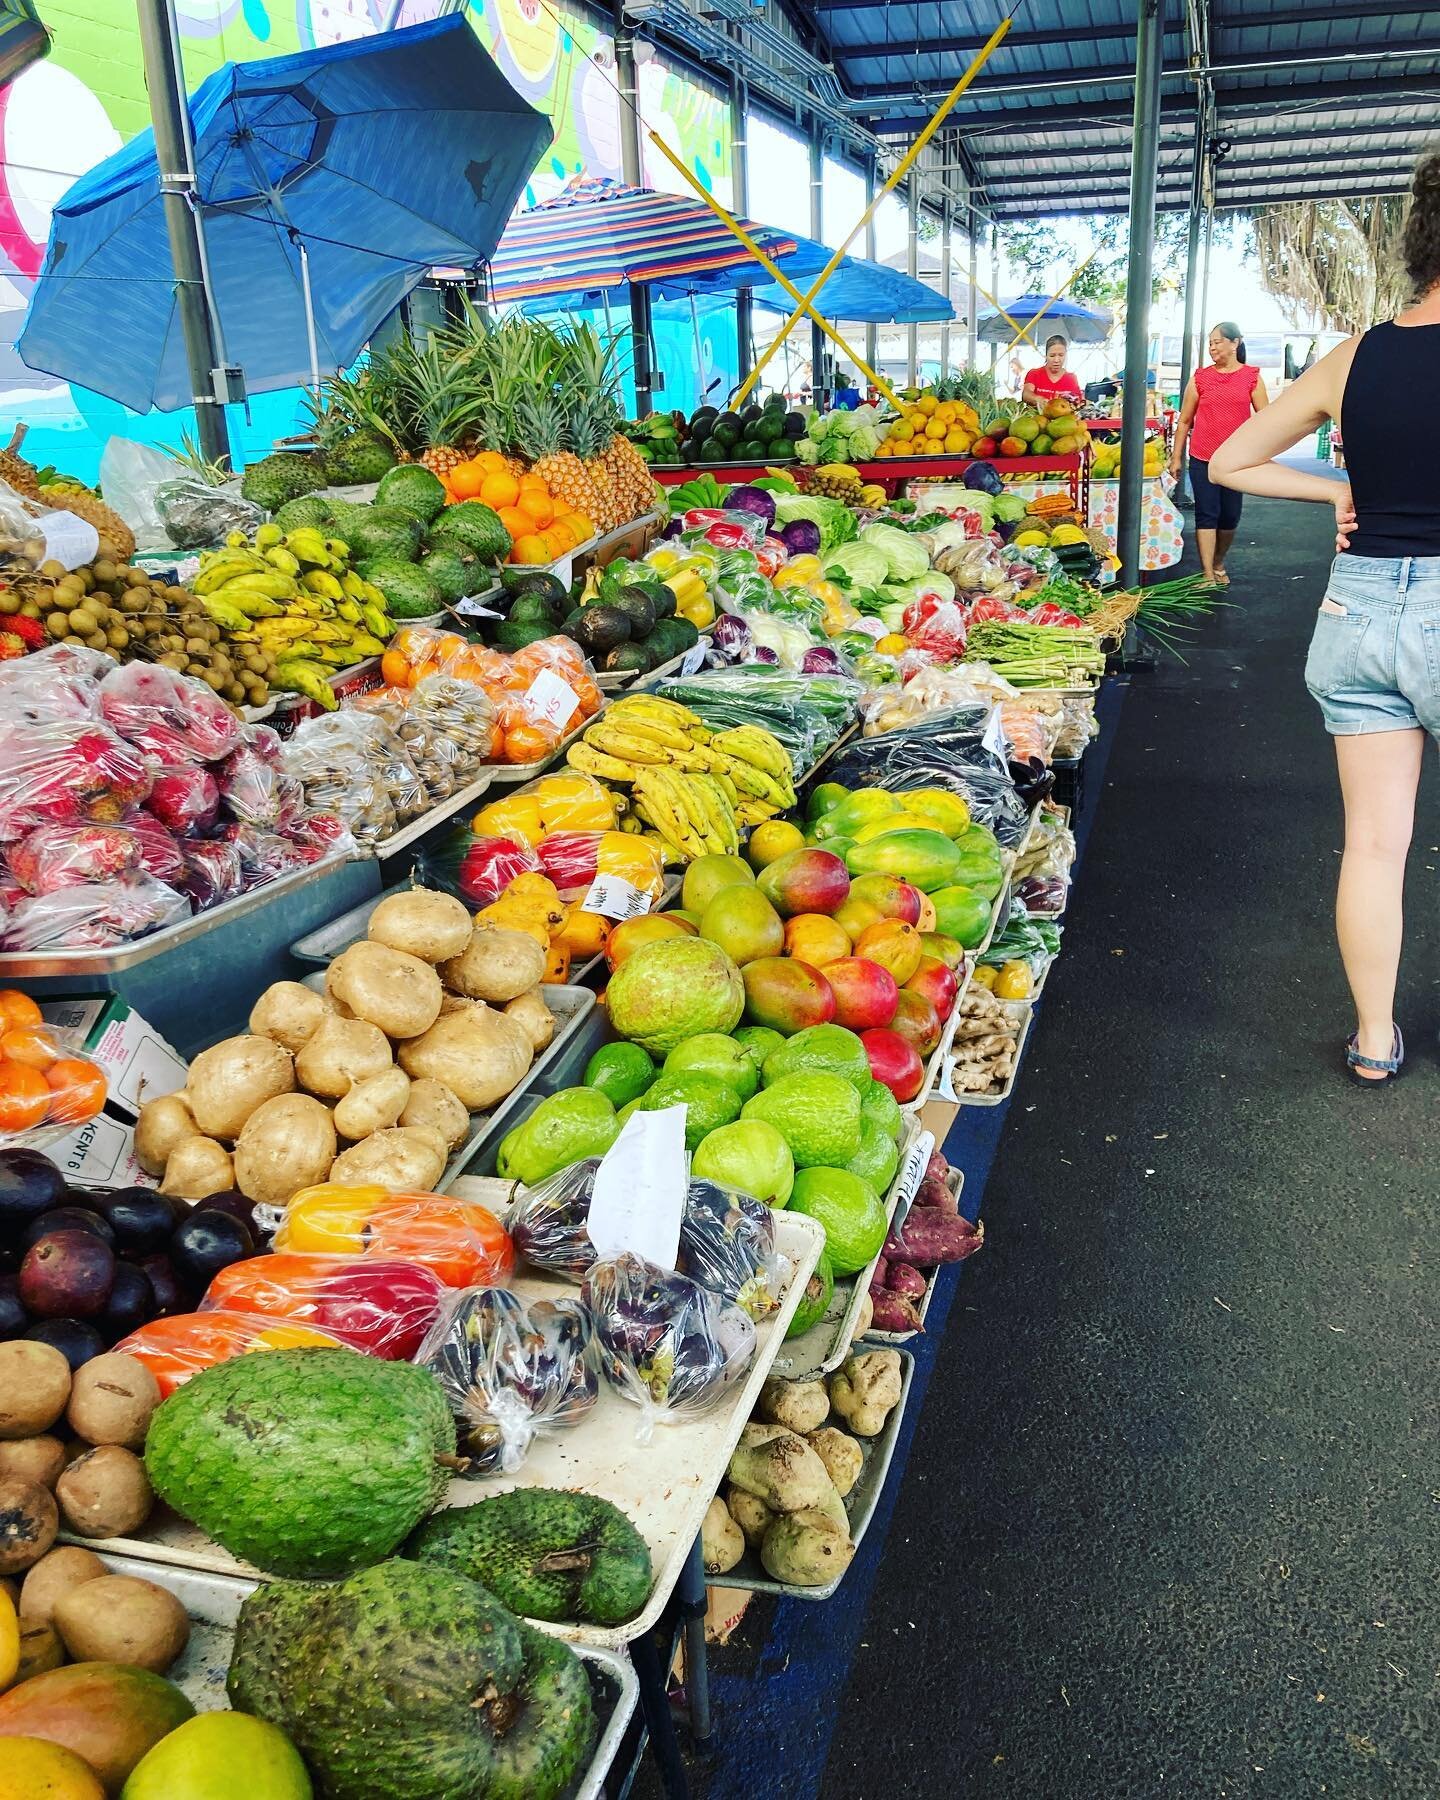 Big Island adventures, part 3: points southeast and southwest. Hilo is so charming! Stocked up on fruit and homemade banana bread at the farmers&rsquo; market, made it to the poke mecca of @suisanfish and picnicked at a nearby waterfront park. Took a